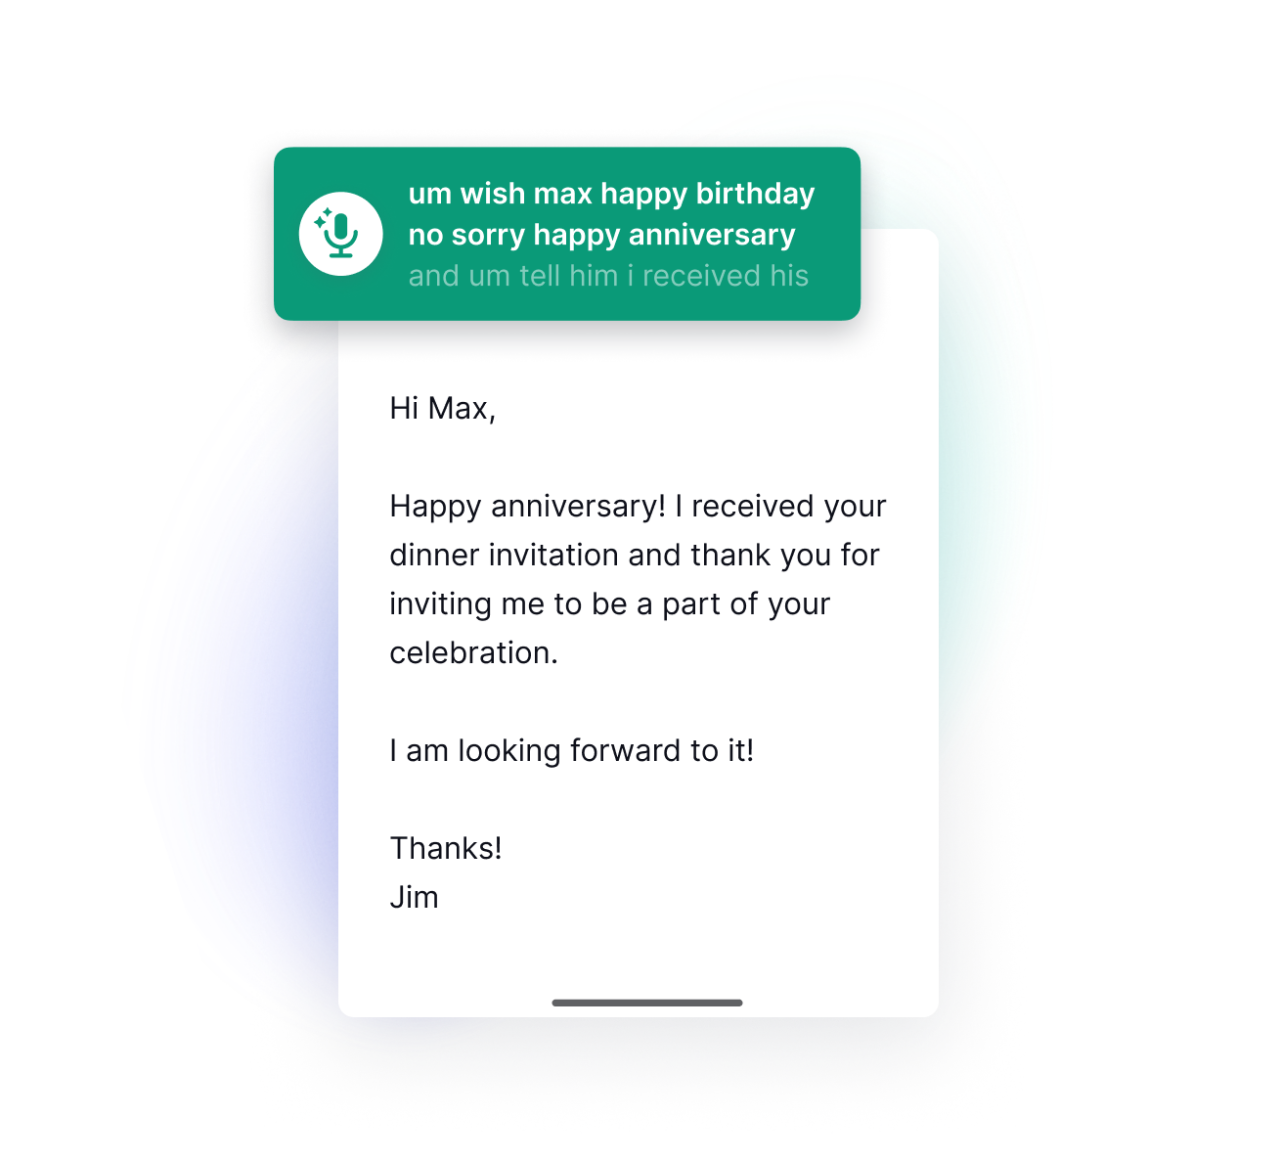 Example of how Grammarly voice compose can translate a message into a polished e-mail